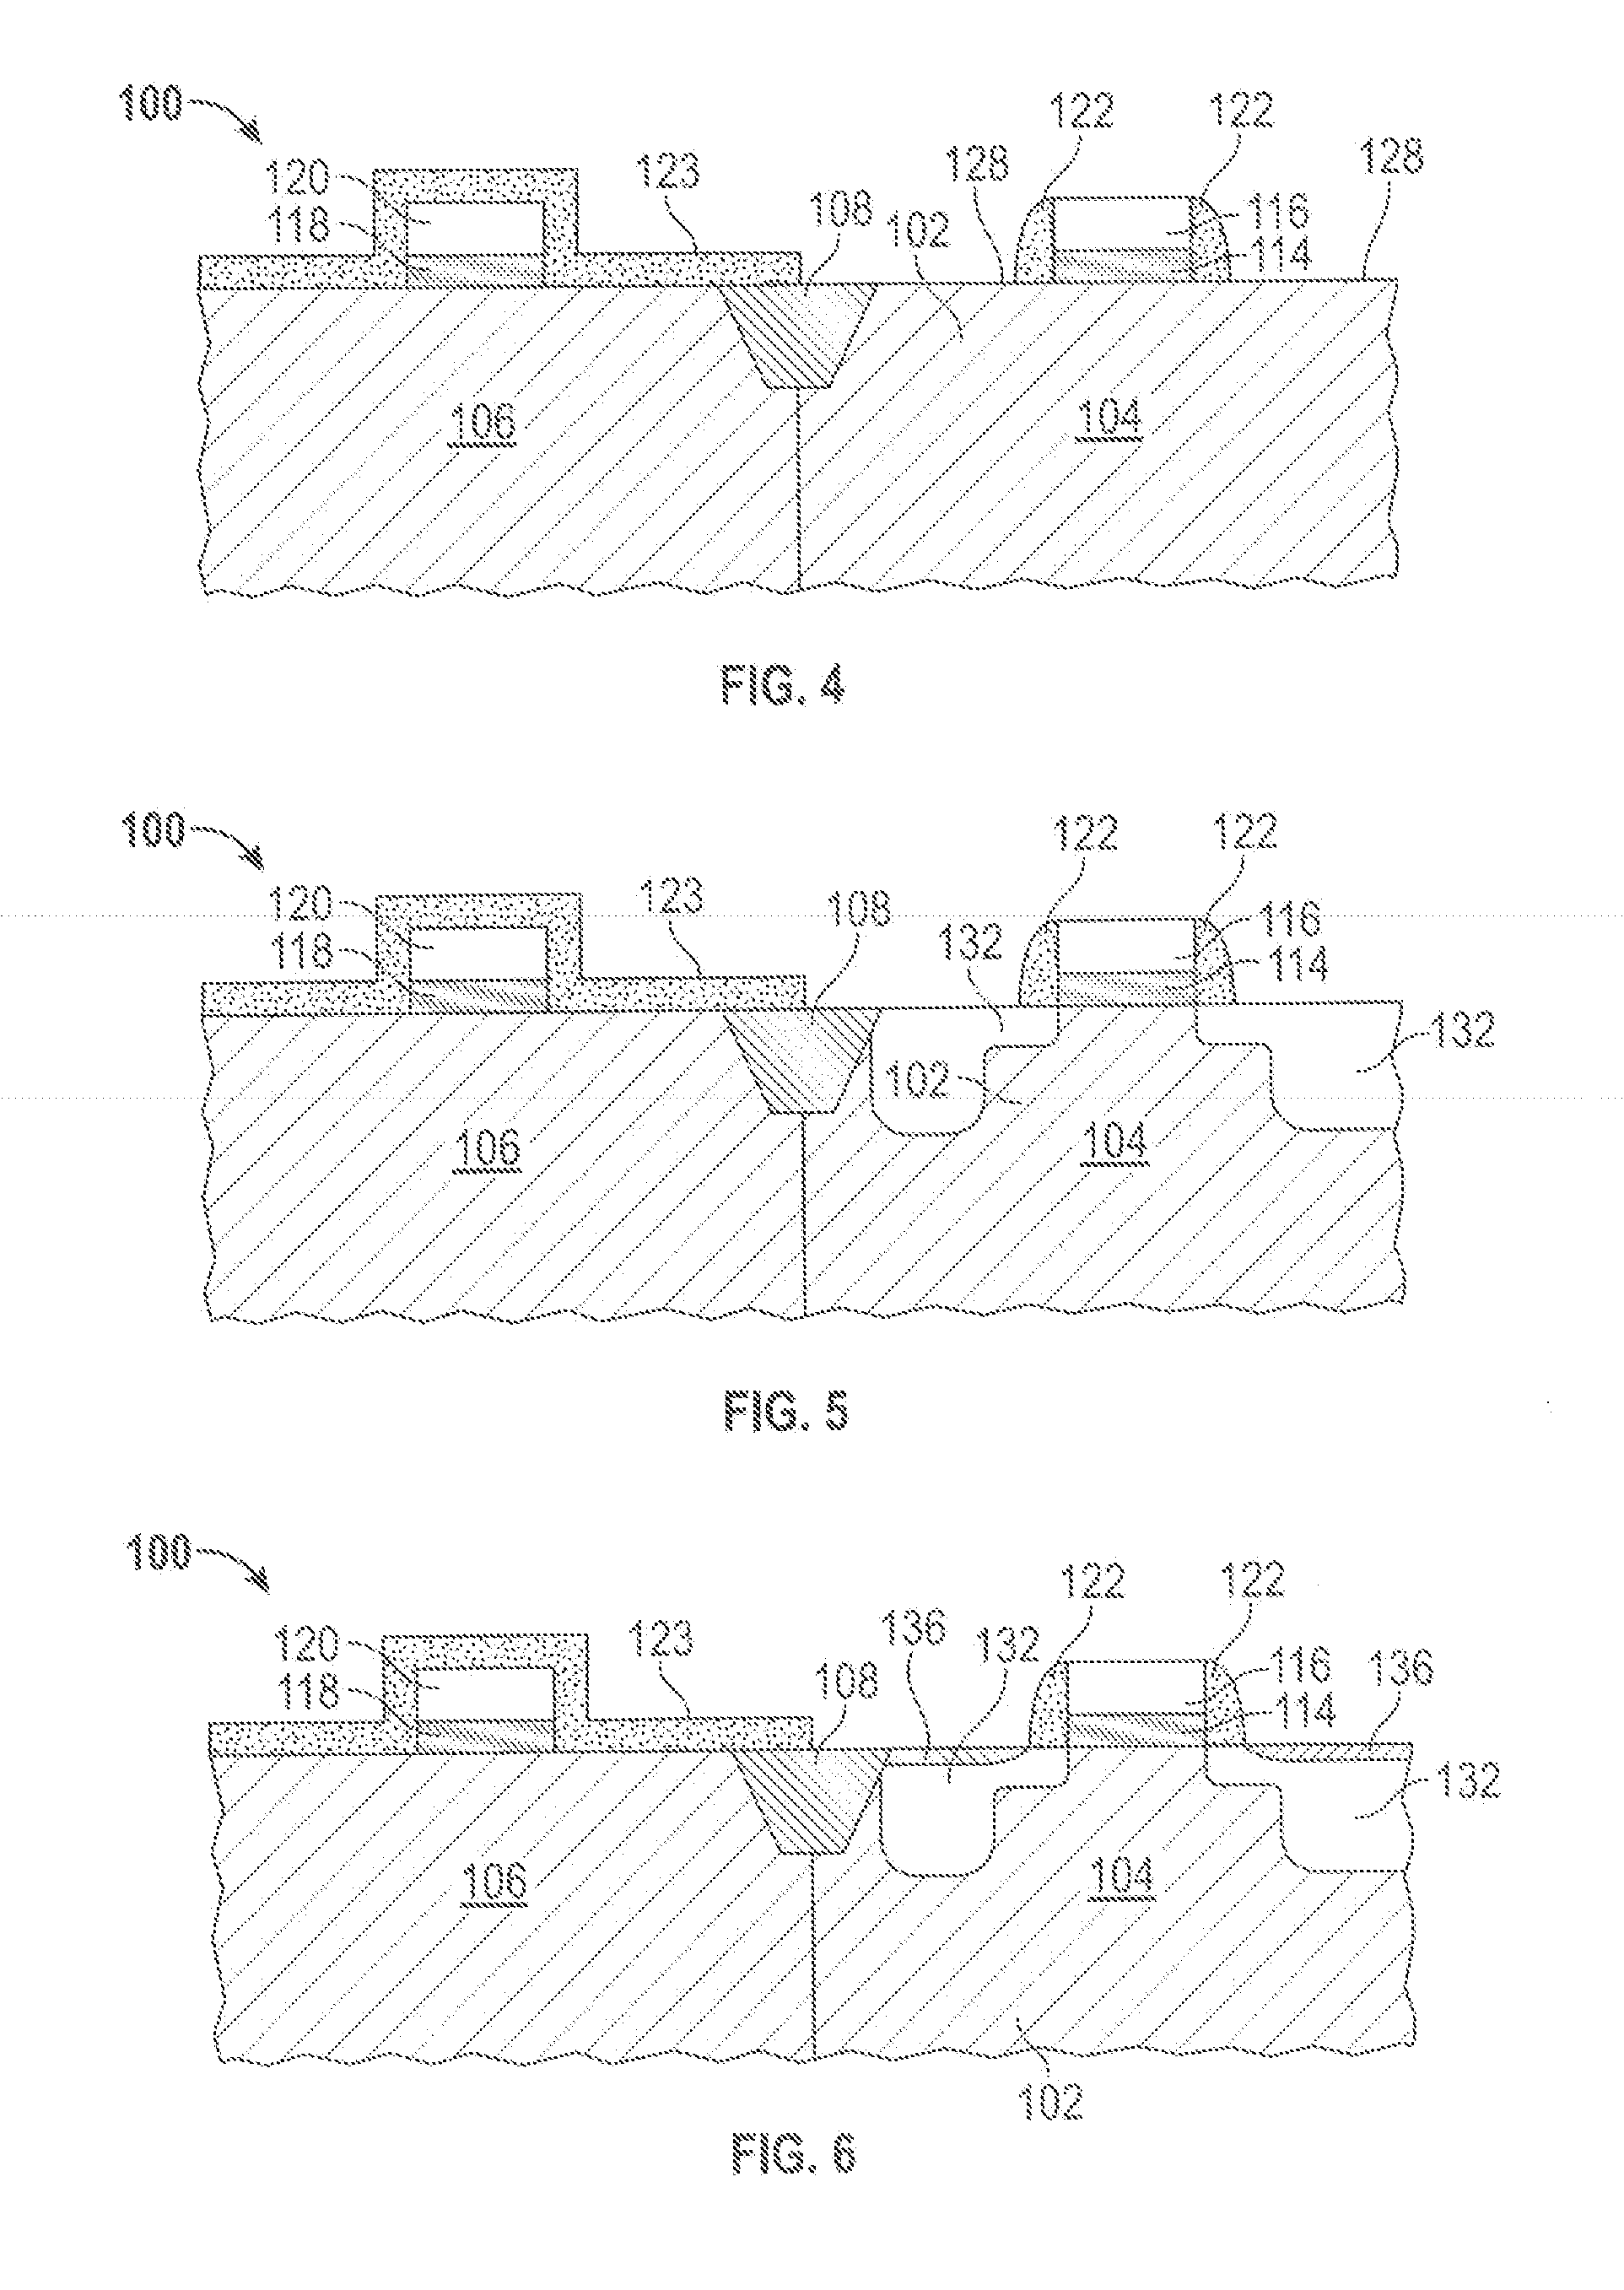 Semiconductor device fabrication methods